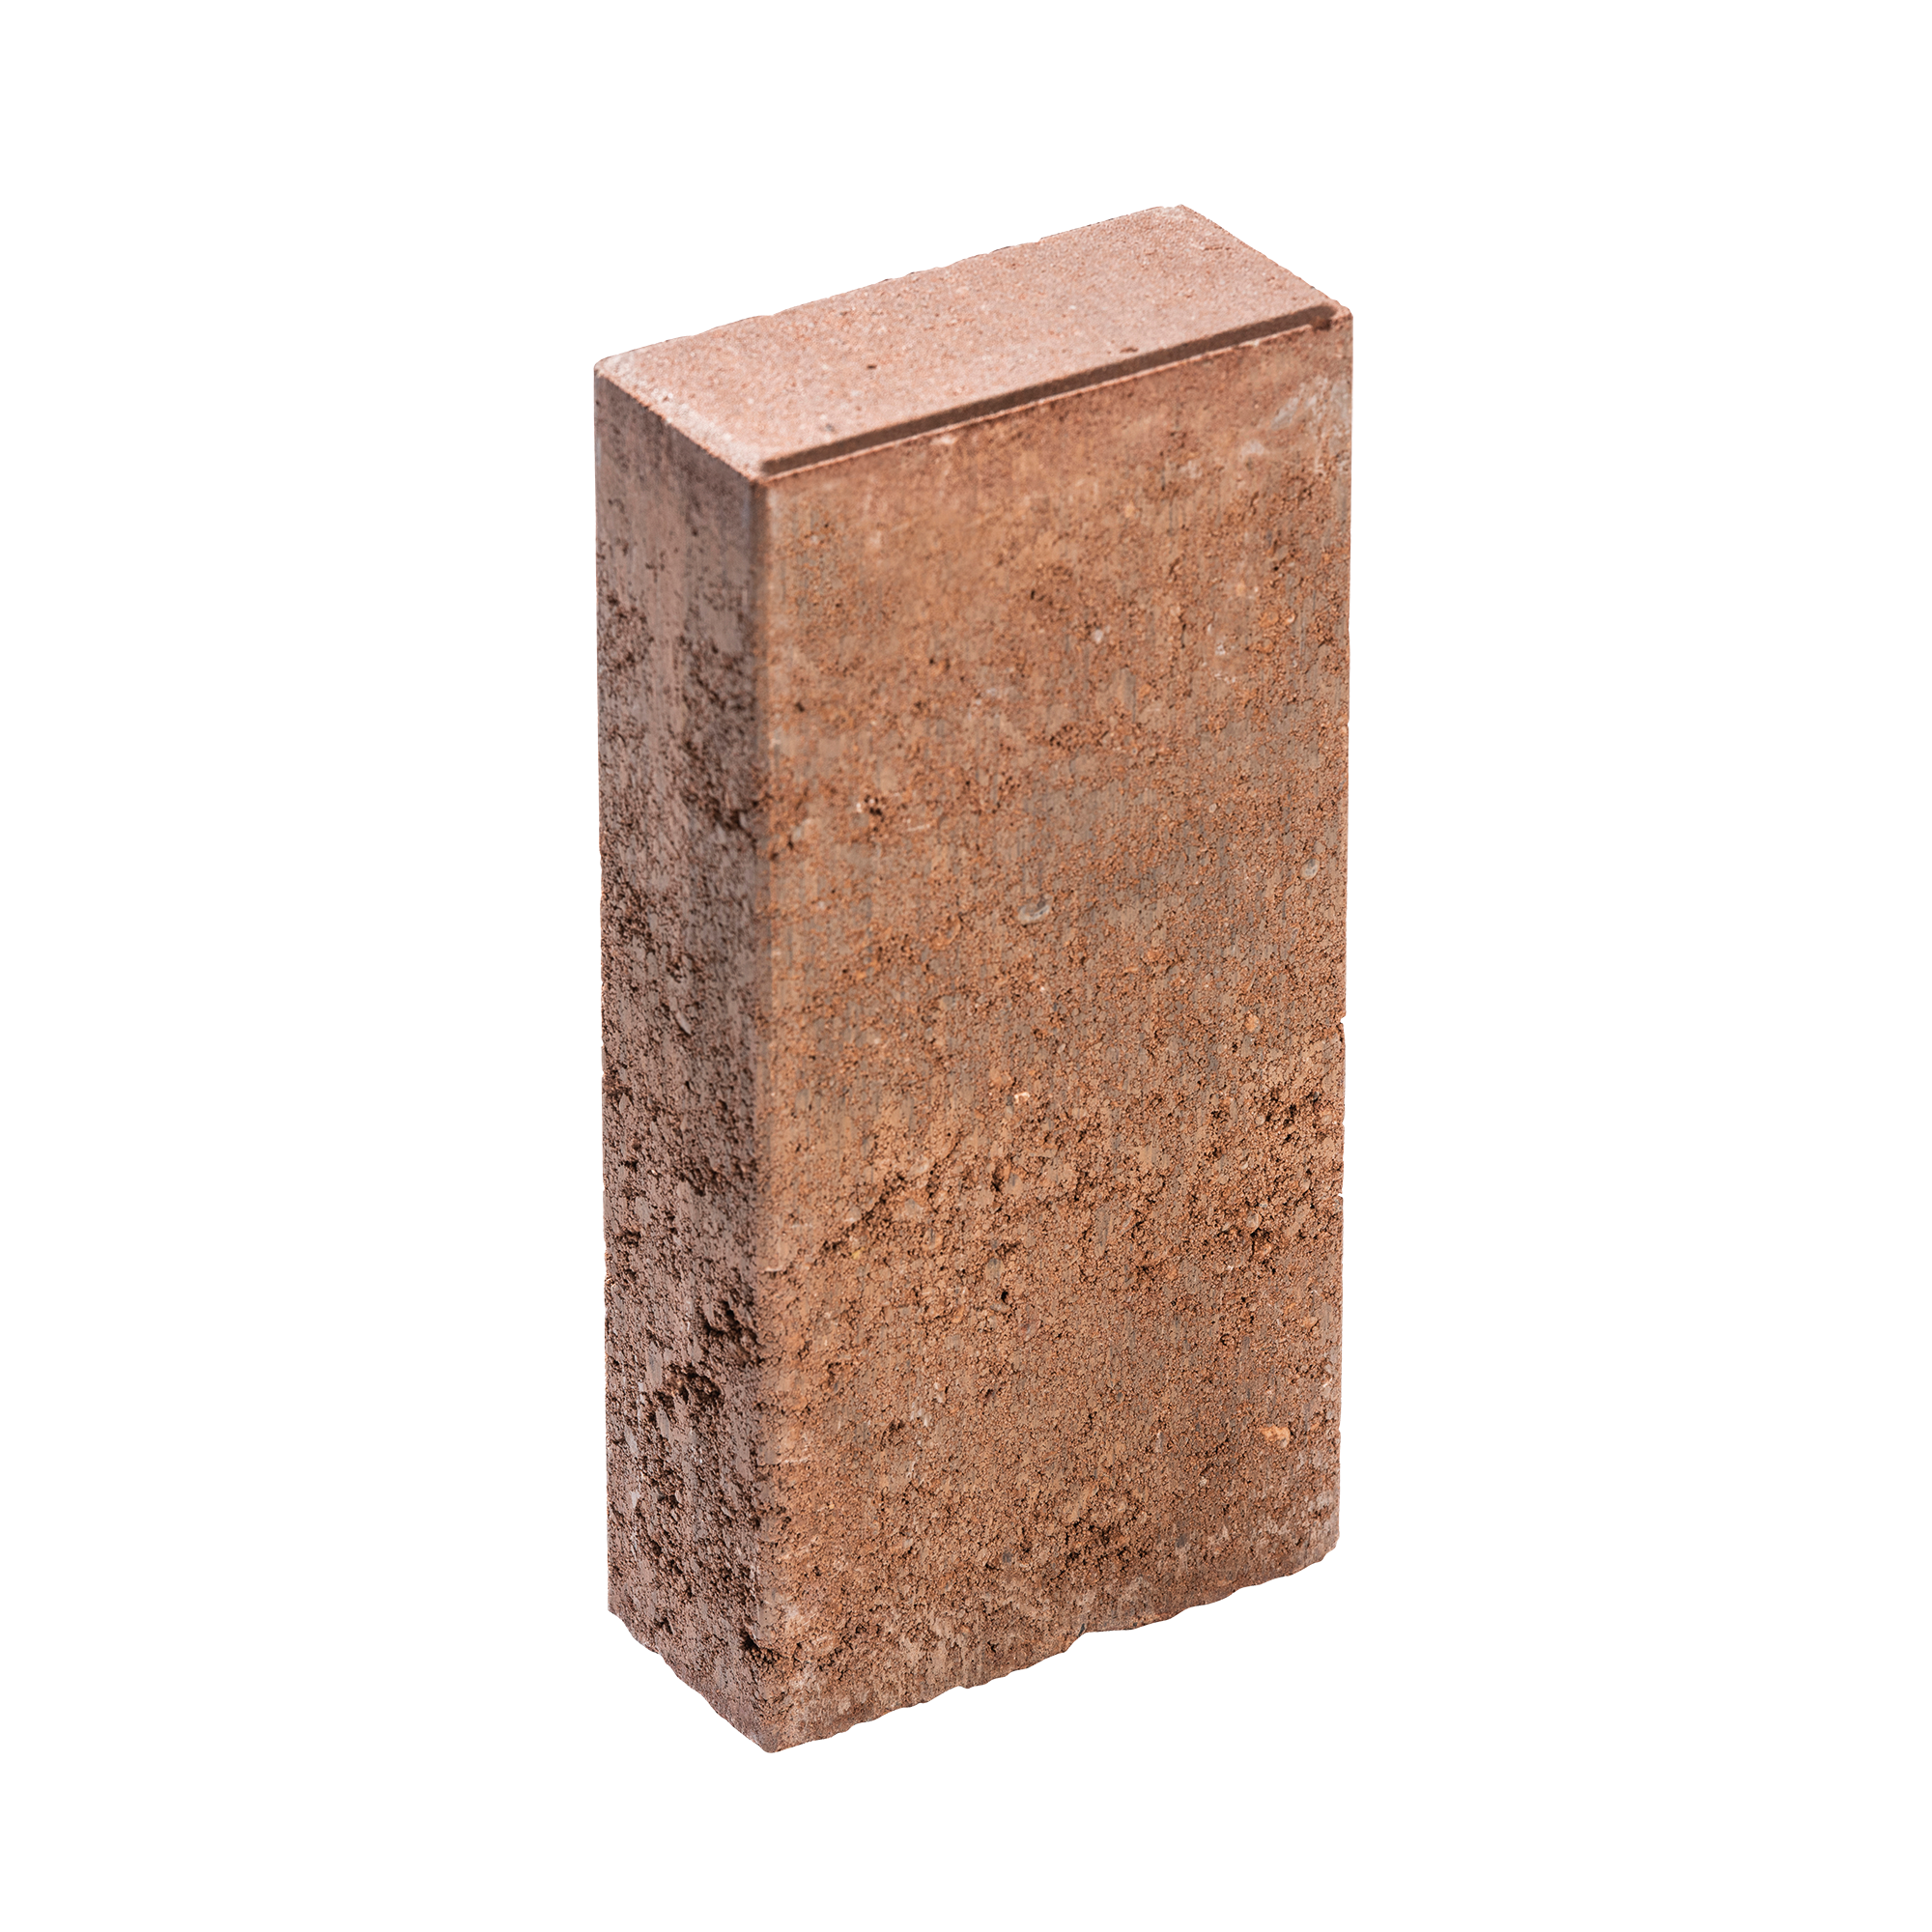 Reckteckpalisade Beton braun 25 x 12,5 x 6 cm + product picture